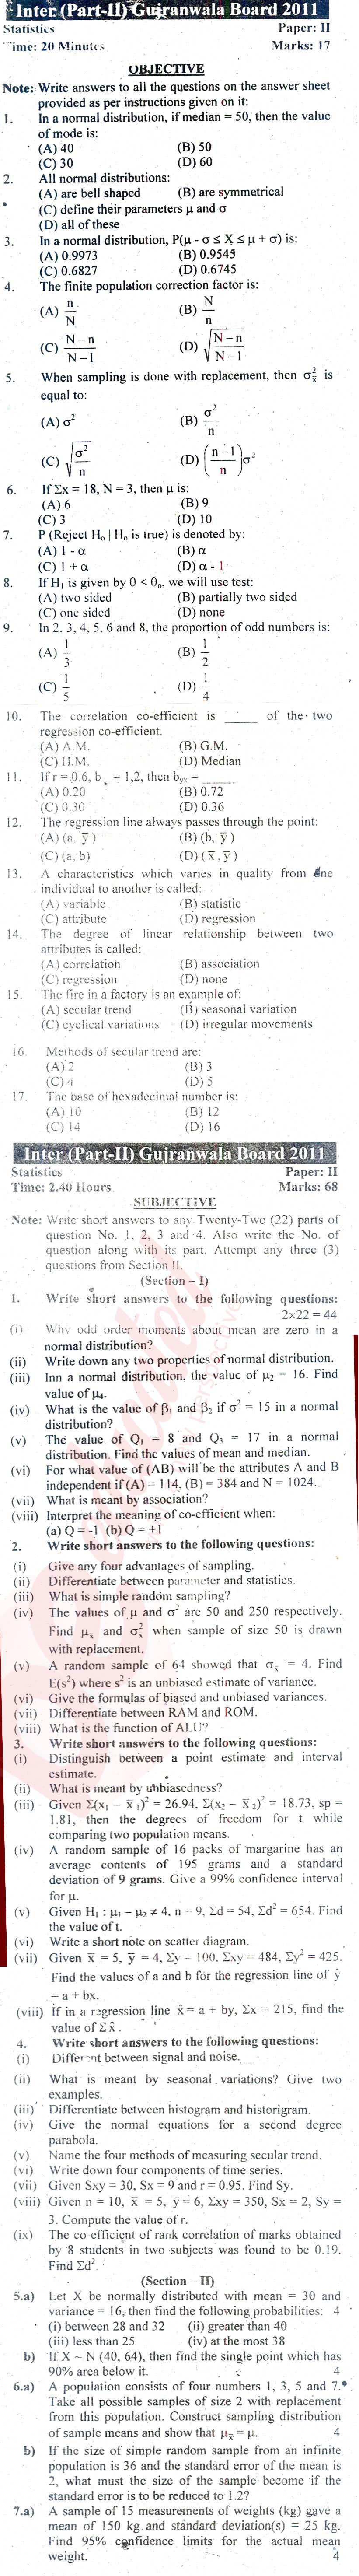 Statistics 12th class Past Paper Group 1 BISE Gujranwala 2011